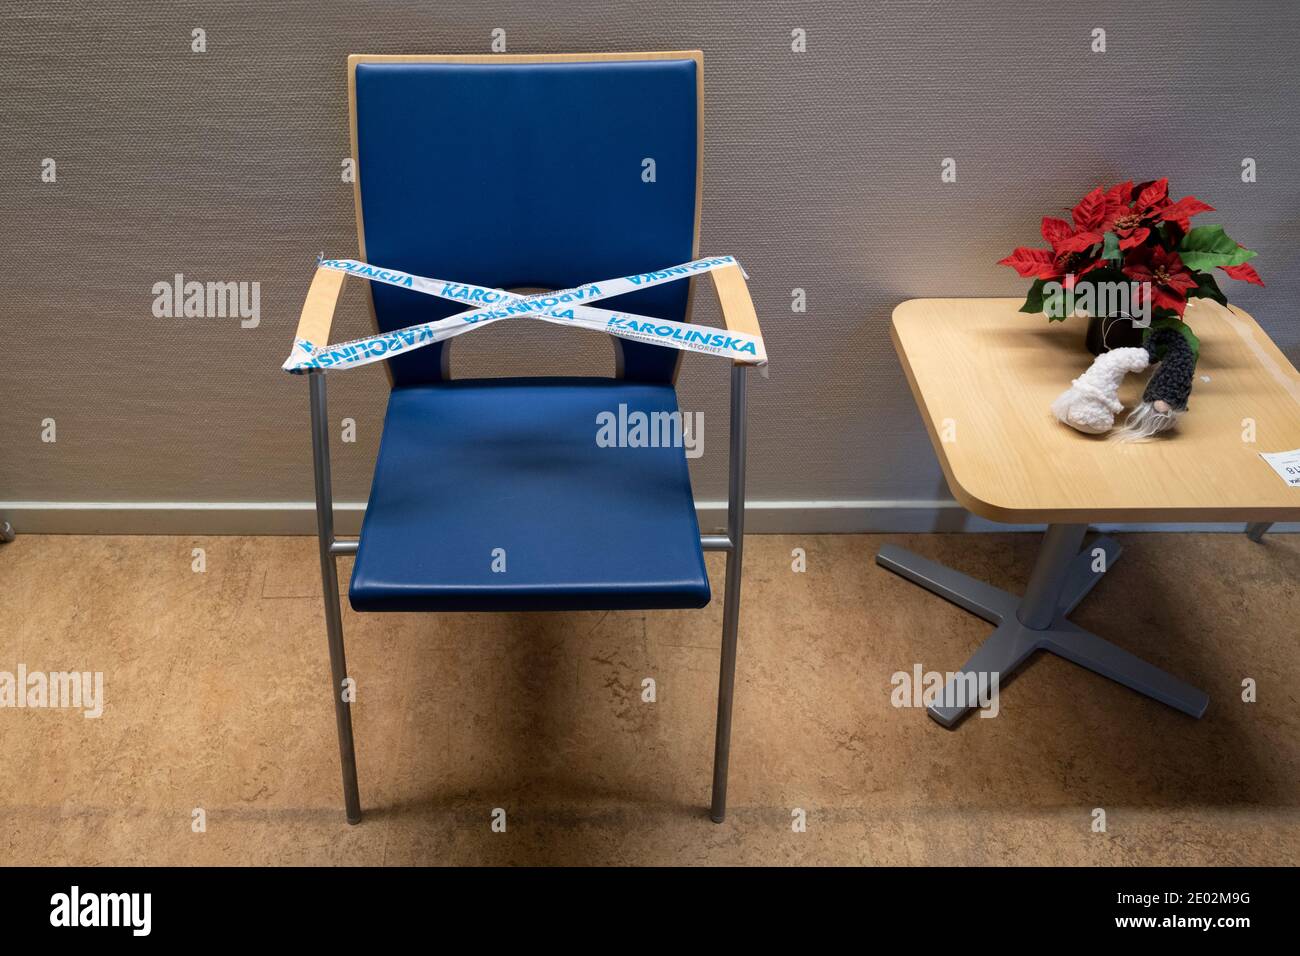 This chair must not be used due to the risk of infection. Stock Photo